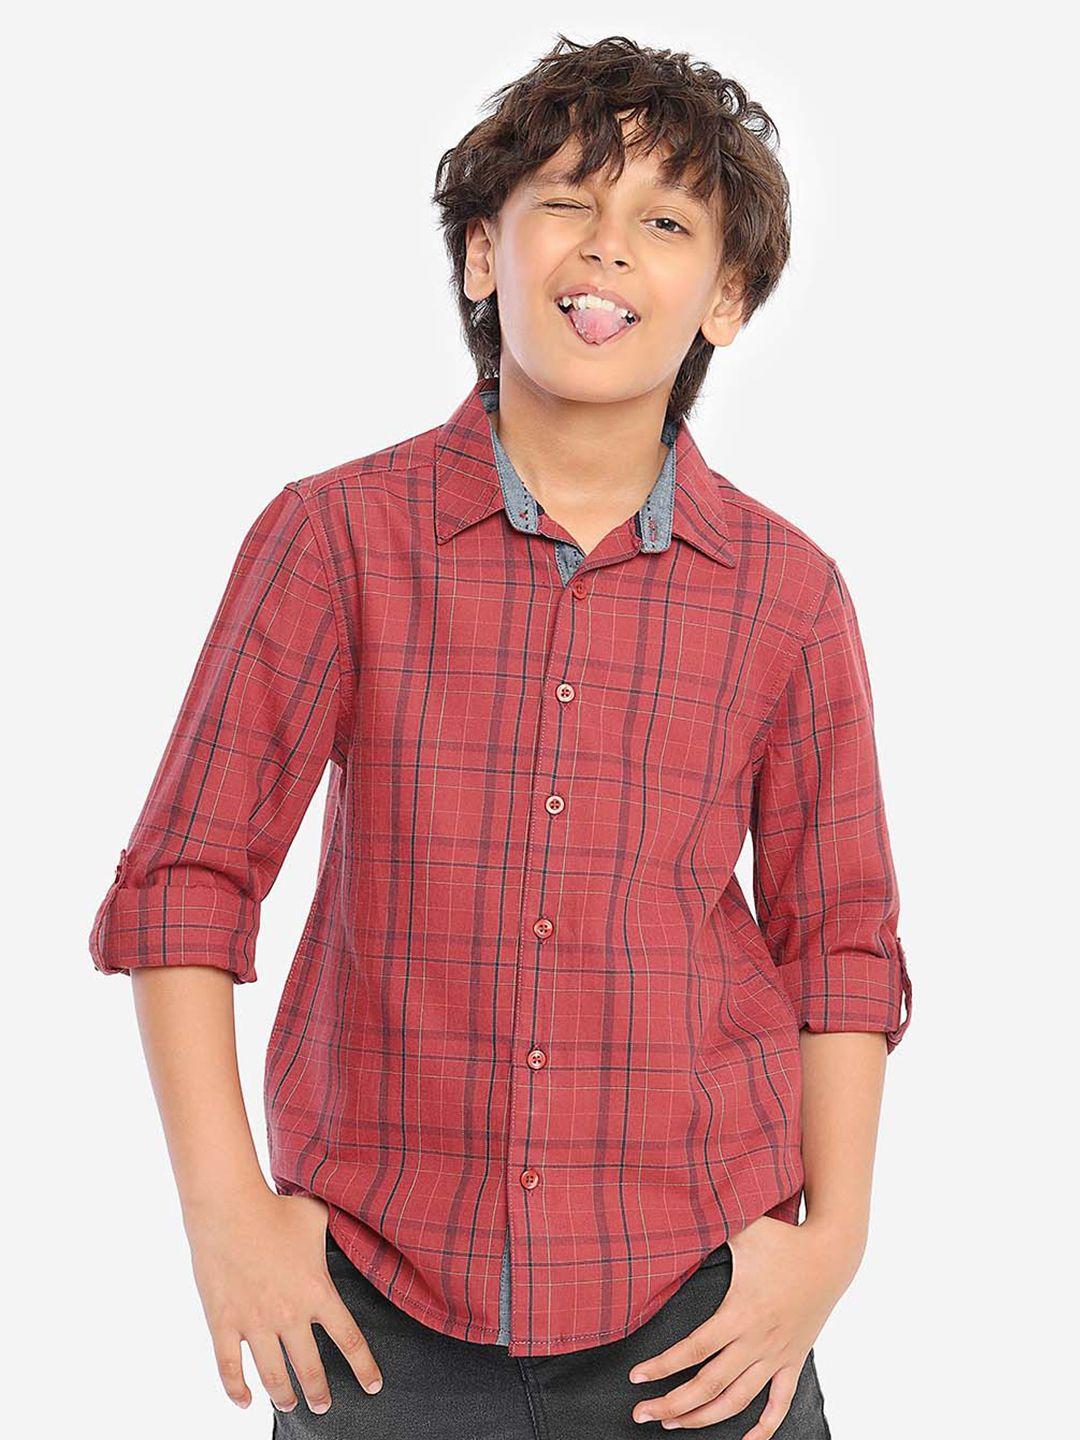 bonkids-boys-red-standard-opaque-checked-casual-shirt